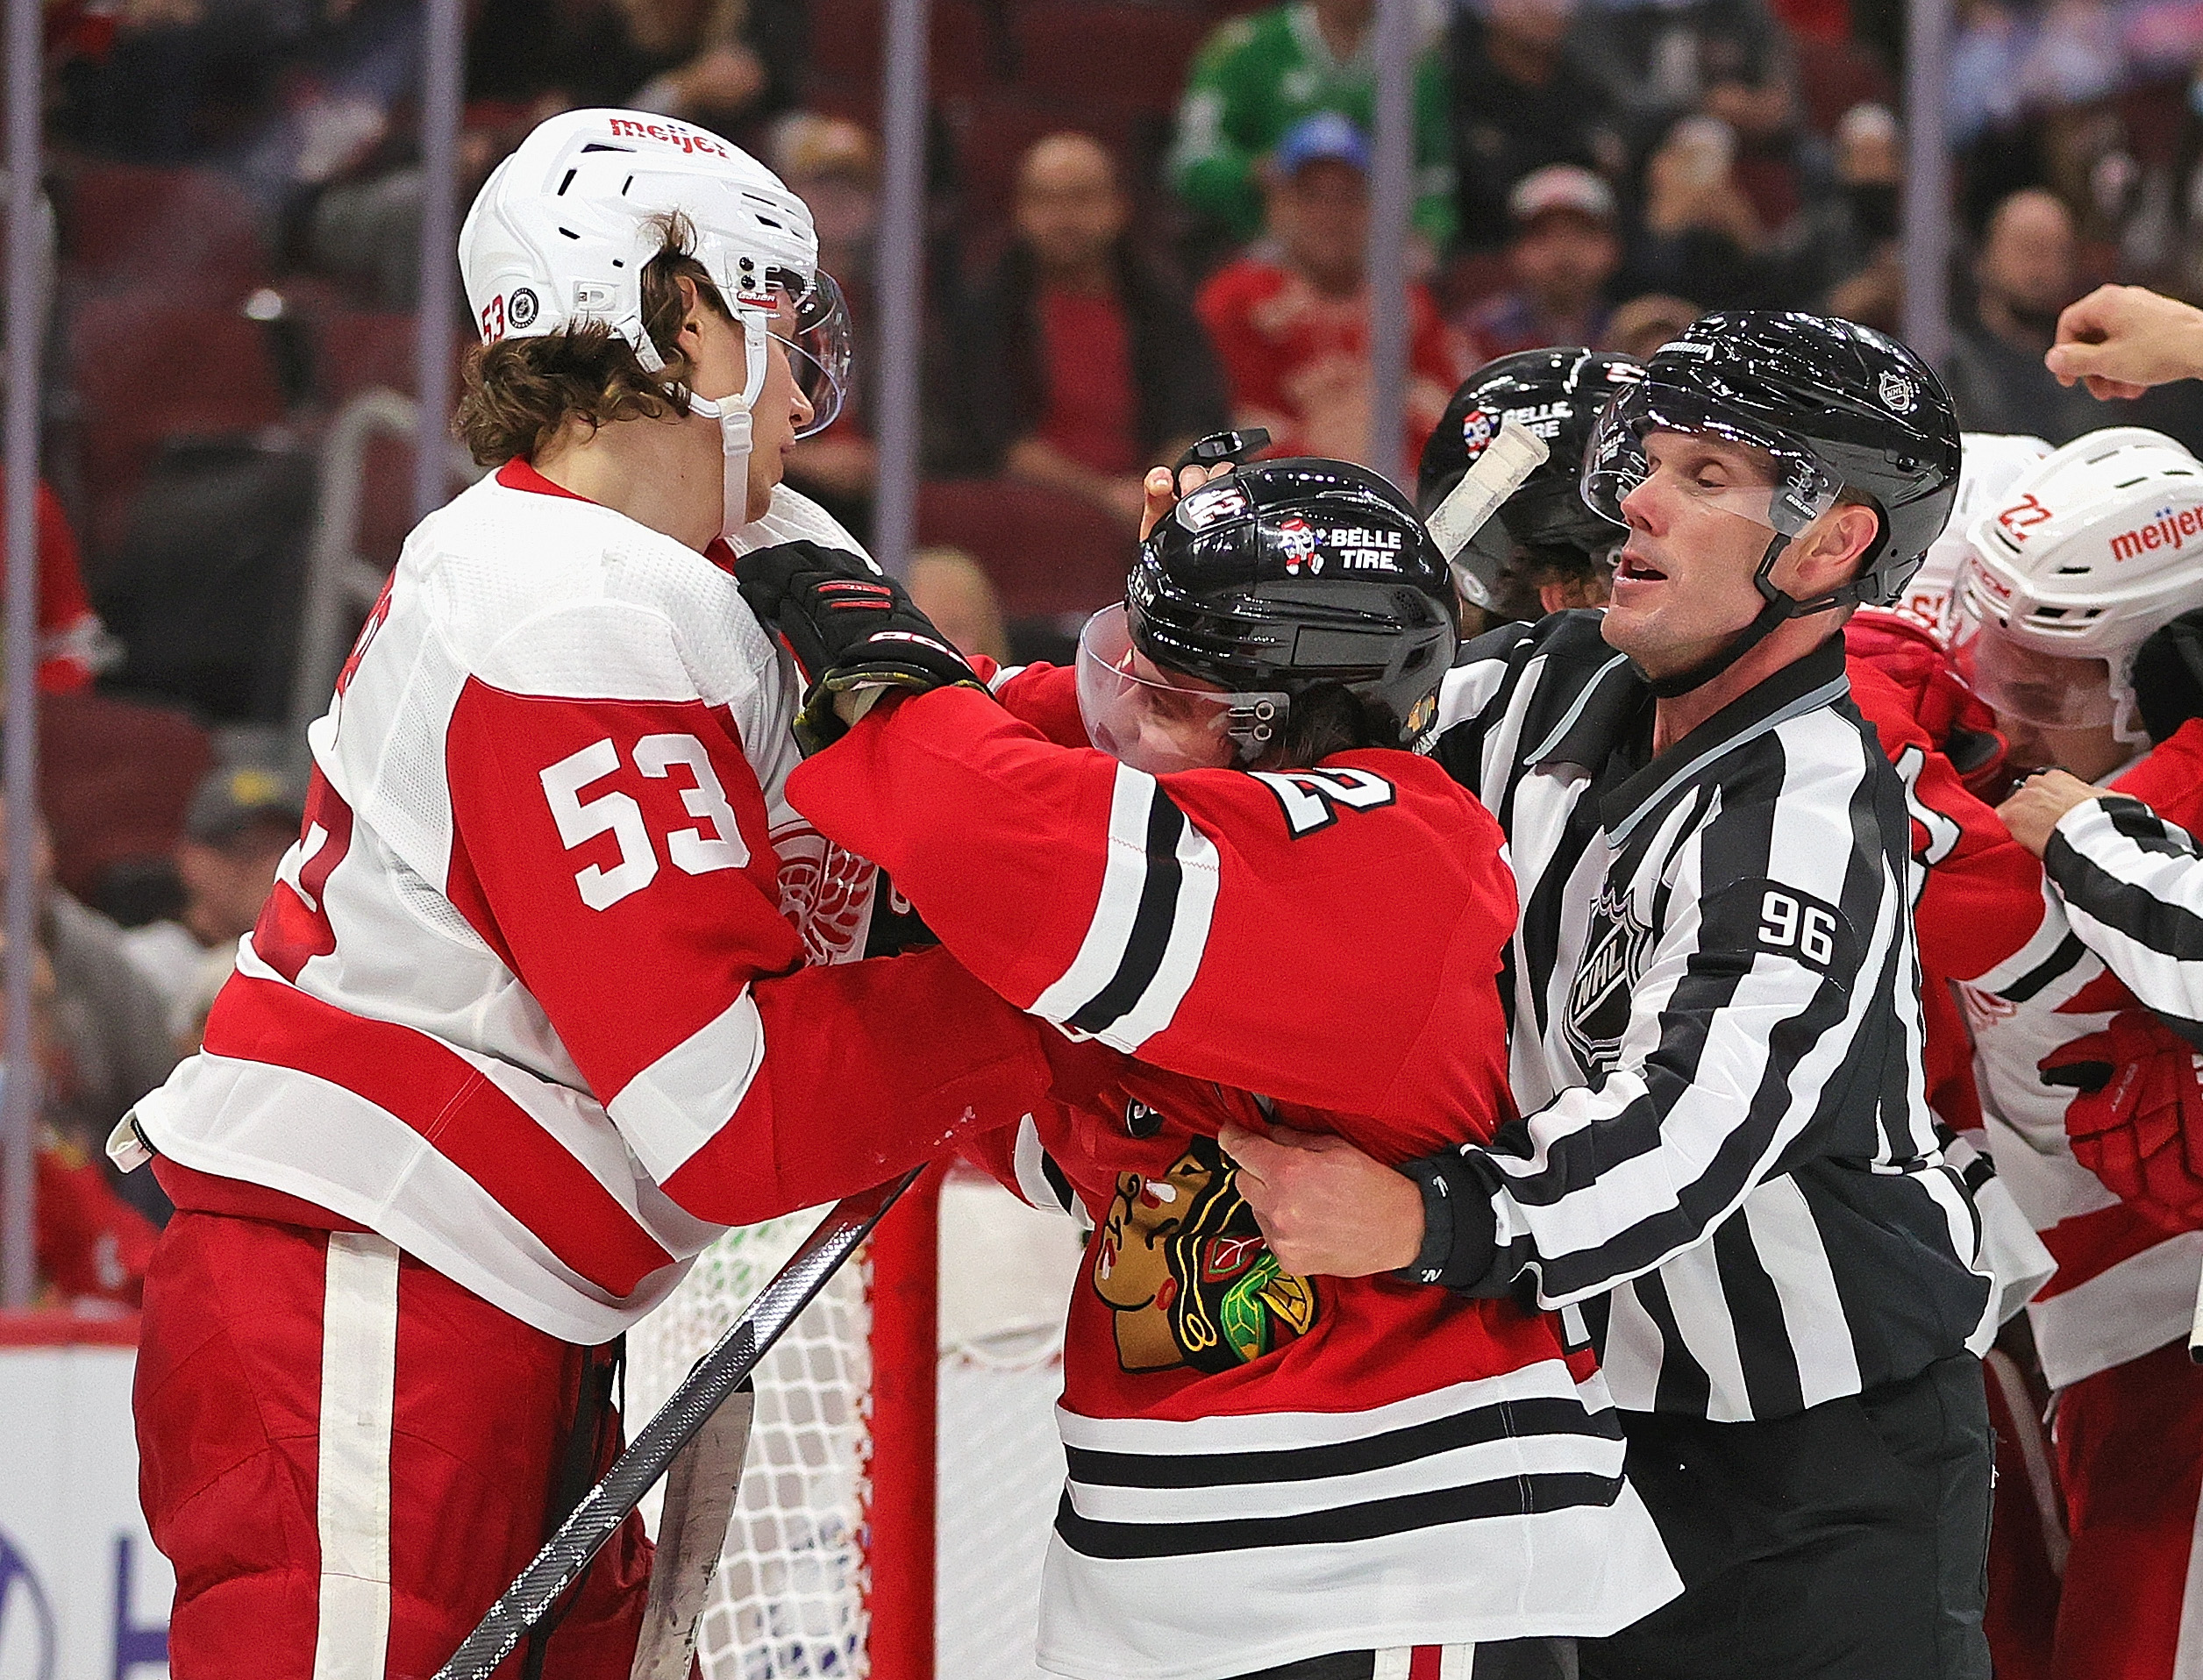 Linesman David Brisebois #96 tries to break up an altercation between Alex DeBrincat #12 of the Chicago Blackhawks and Moritz Seider #53 of the Detroit Red Wings at the United Center on October 24, 2021 in Chicago, Illinois.